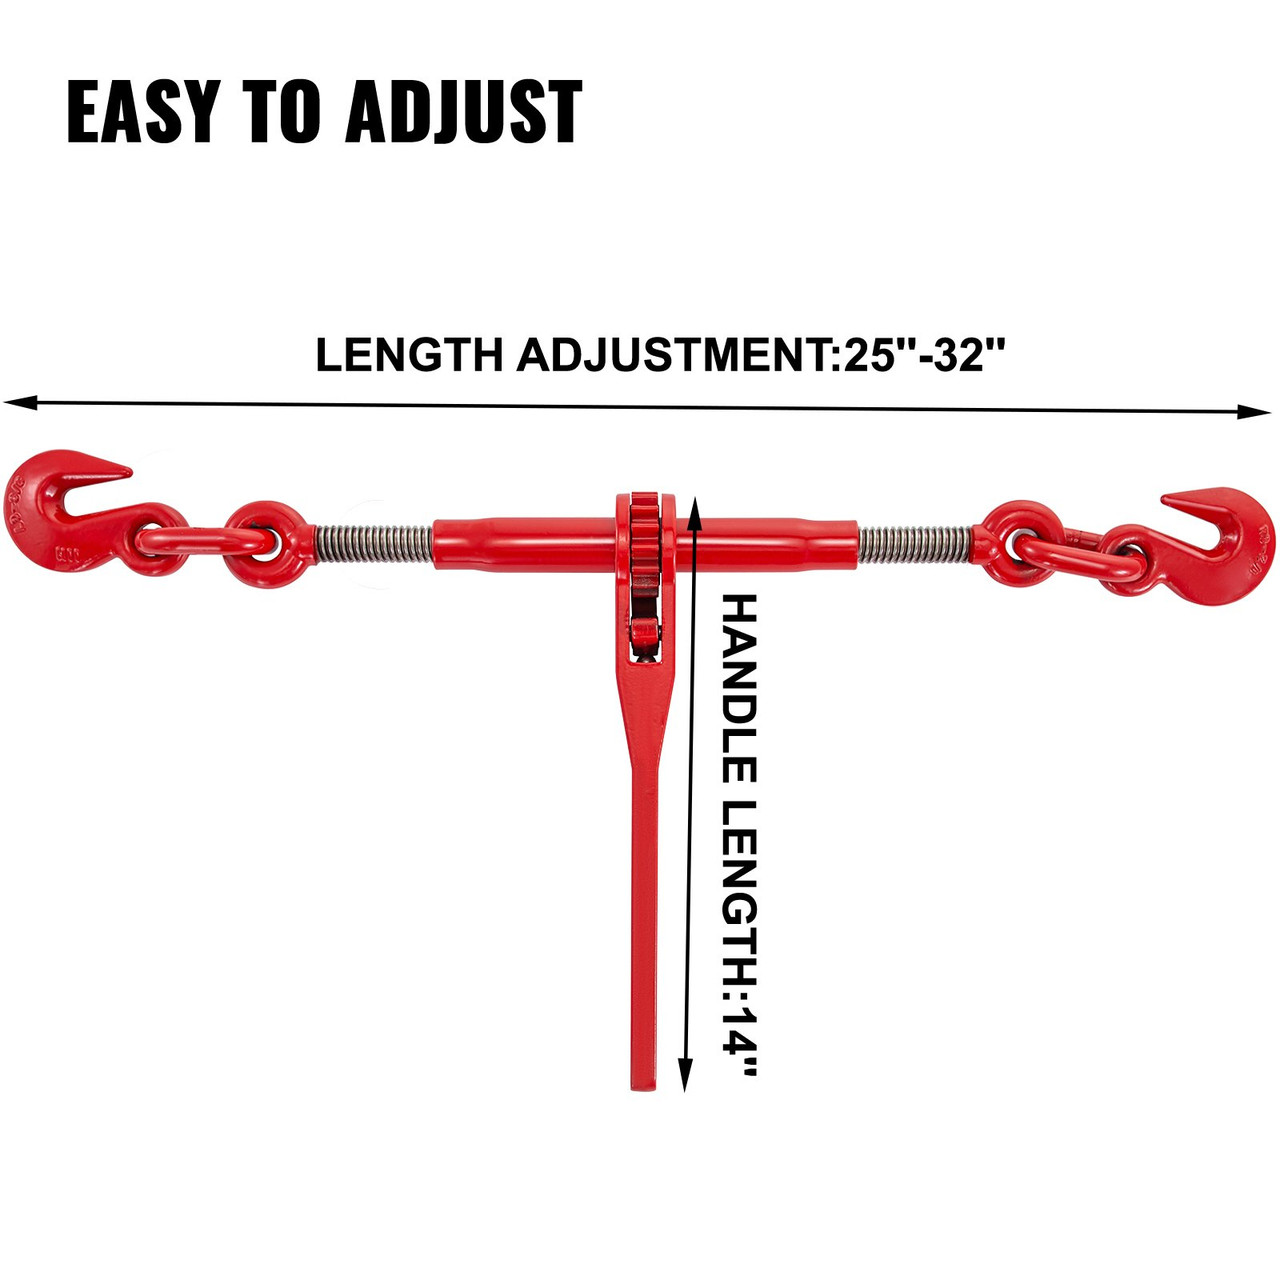 VEVOR 9215LBS 3/8" - 1/2" Ratchet Binders 9,215 LBS Secure Working Load, G70 Hooks and Adjustable Length, for Grade 70-80 Chains, Tie Down, Hauling, Towing, 2-Pack, Red